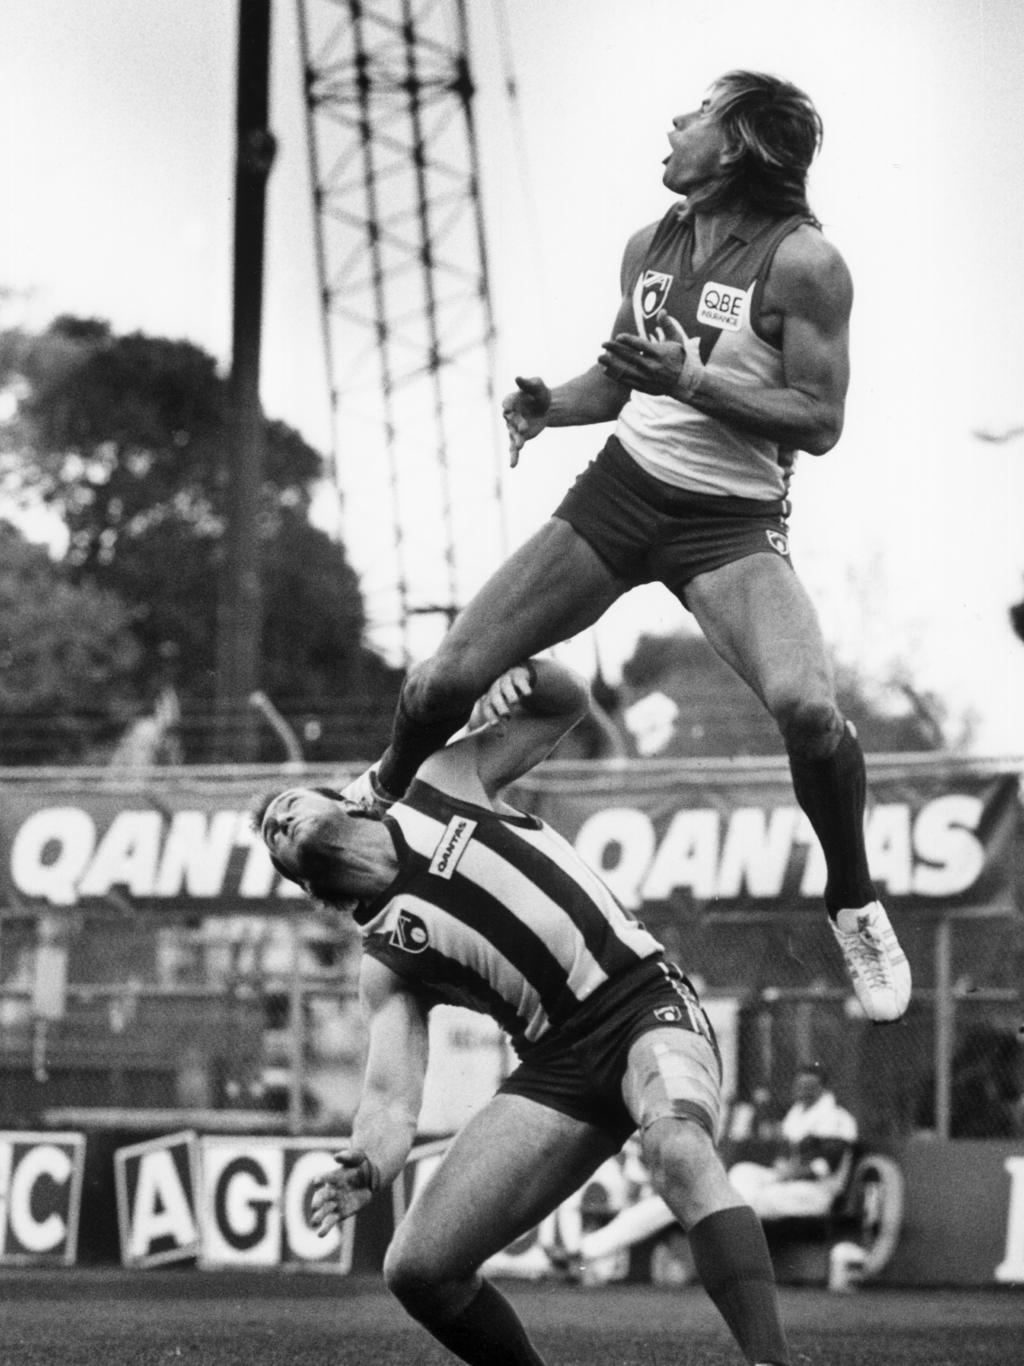 25/04/1991. Warwick Capper flies over Michael Martyn (Mick Martyn). North Melbourne (Kangaroos) v Sydney Swans. Anzac Day. MCG during the Southern Stand redevelopment. Picture: BRUCE HOWARD. Neg: 910426/1-24 (21?)